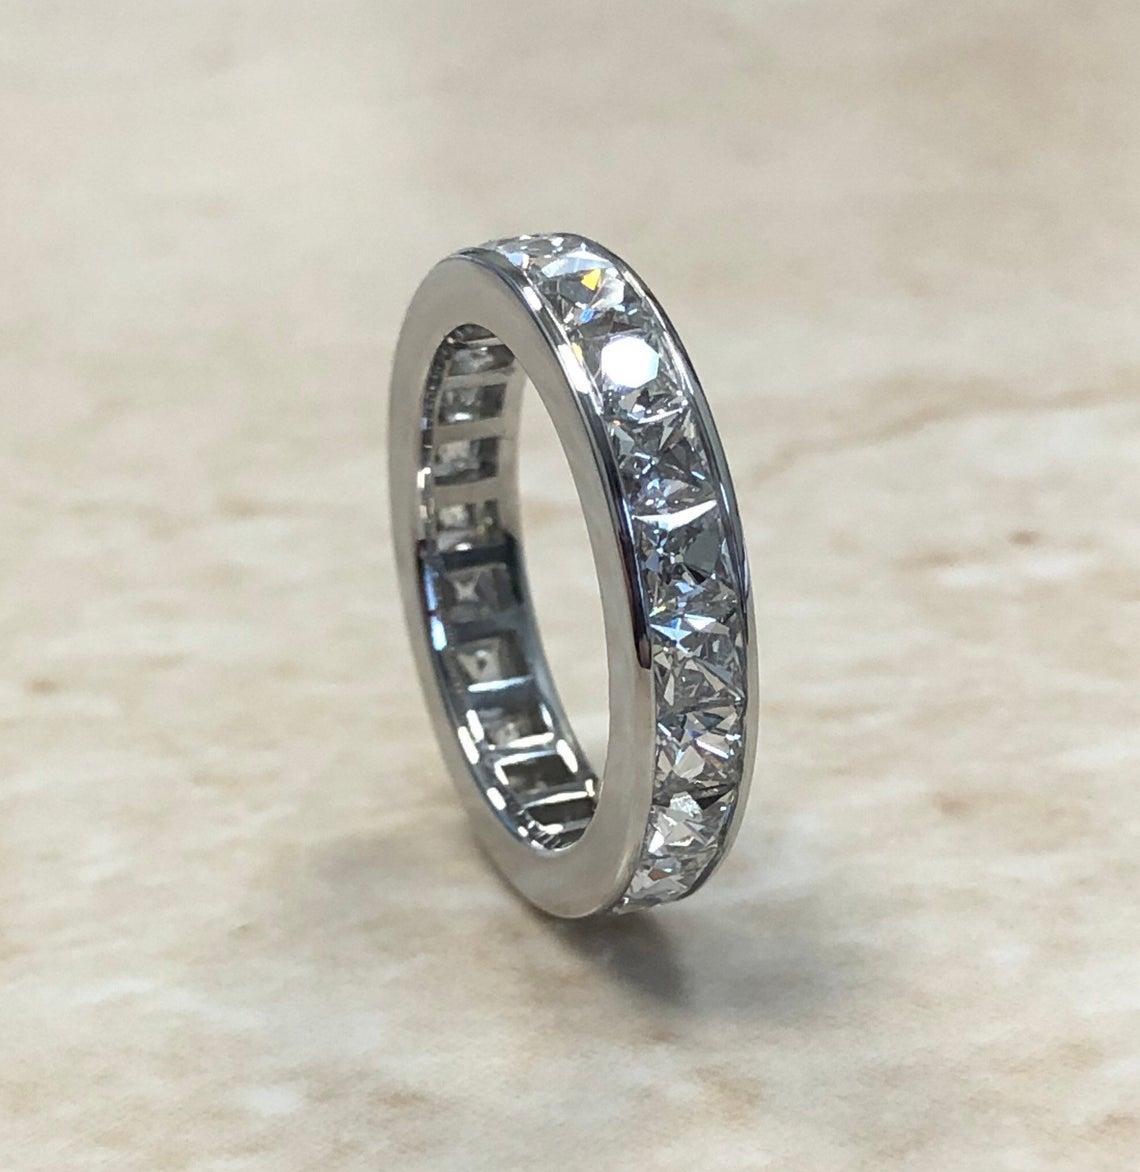 This is a stunning 4.50 Carats channel set swiss cut diamond eternity band crafted in platinum. Seamless channel setting is made in the best handmade style where there are no spaces between the stones. The custom ring that looks oh so